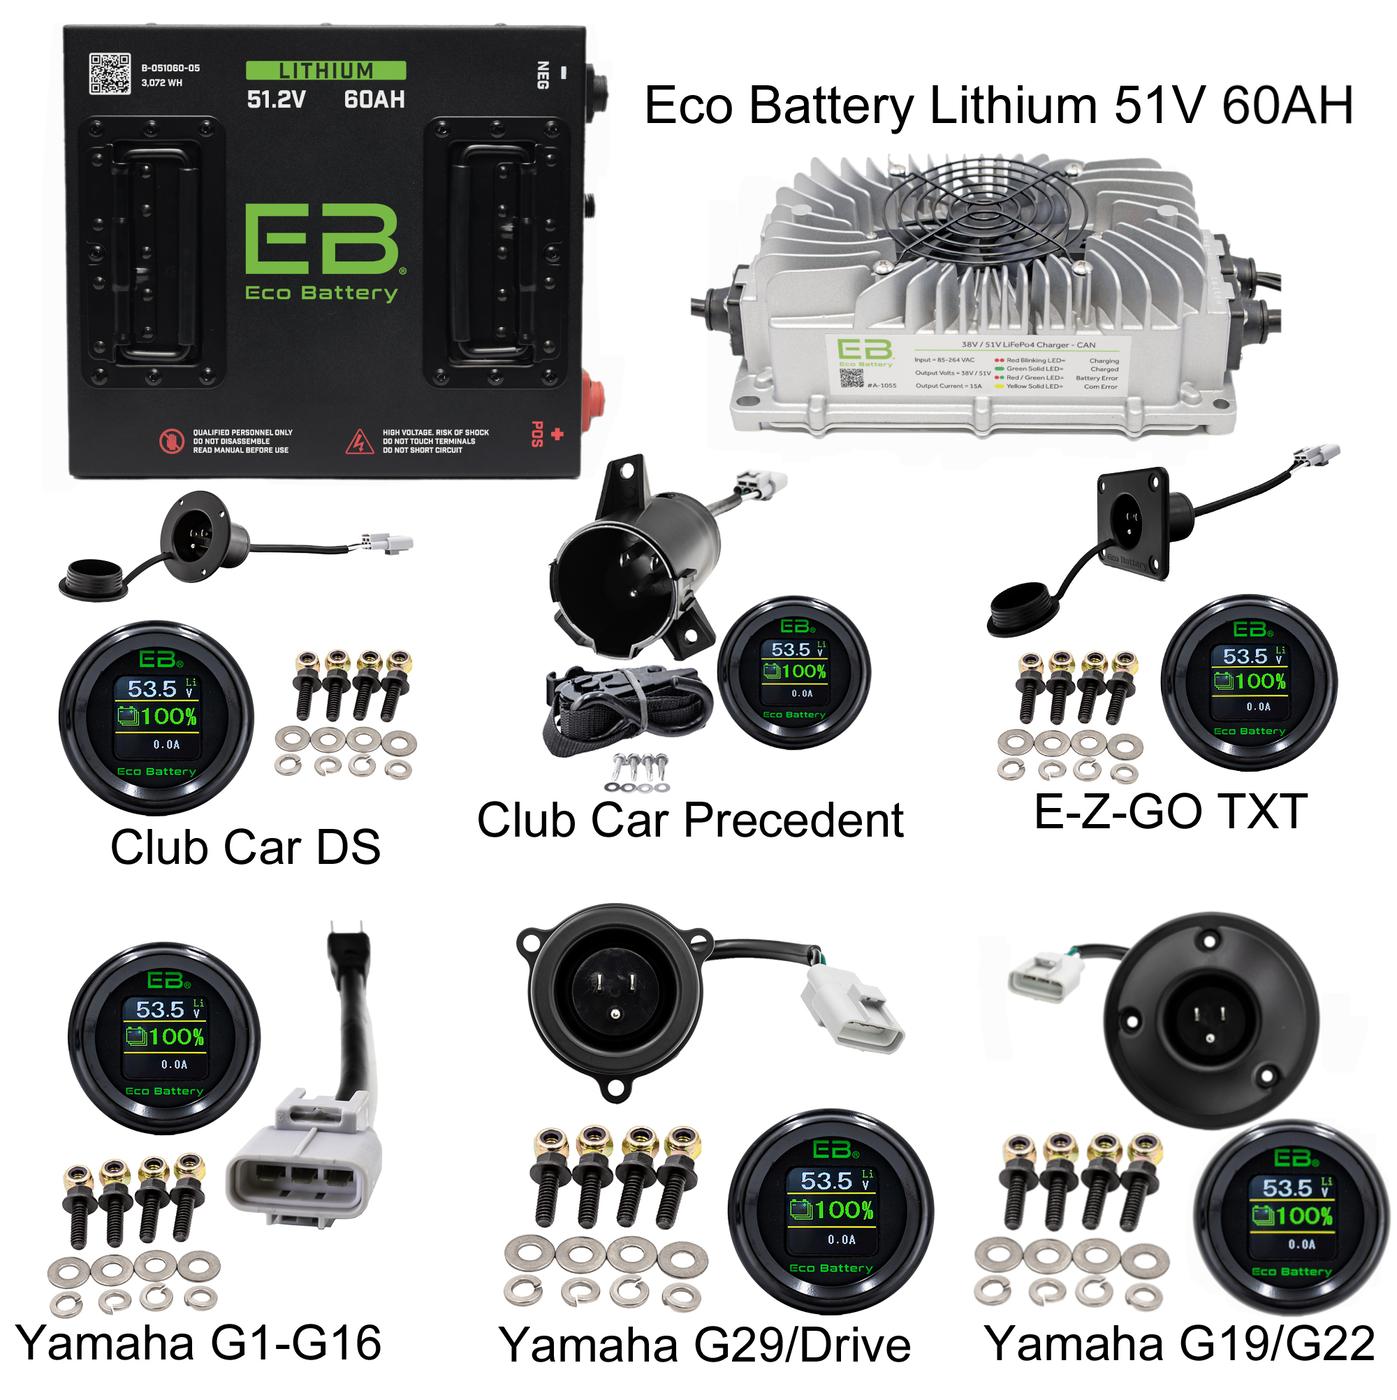 Eco Battery 51V 60AH Kits - Cube Style with Charger